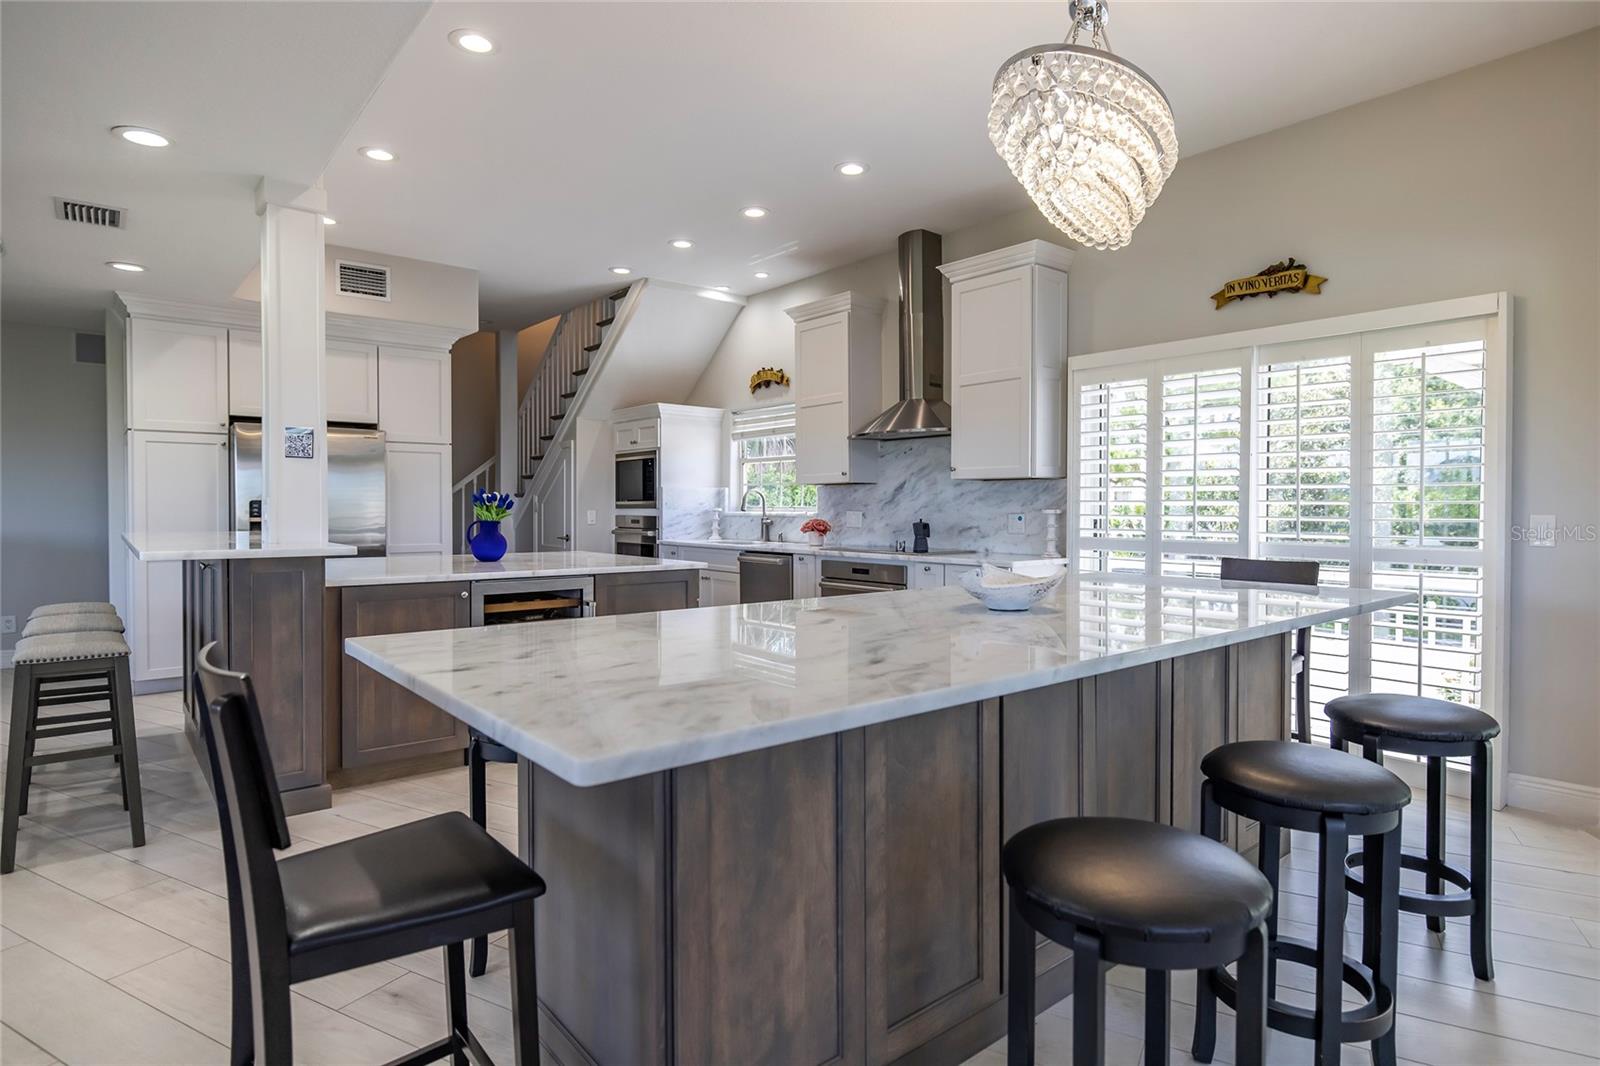 Gorgeous Kitchen fully remodeled